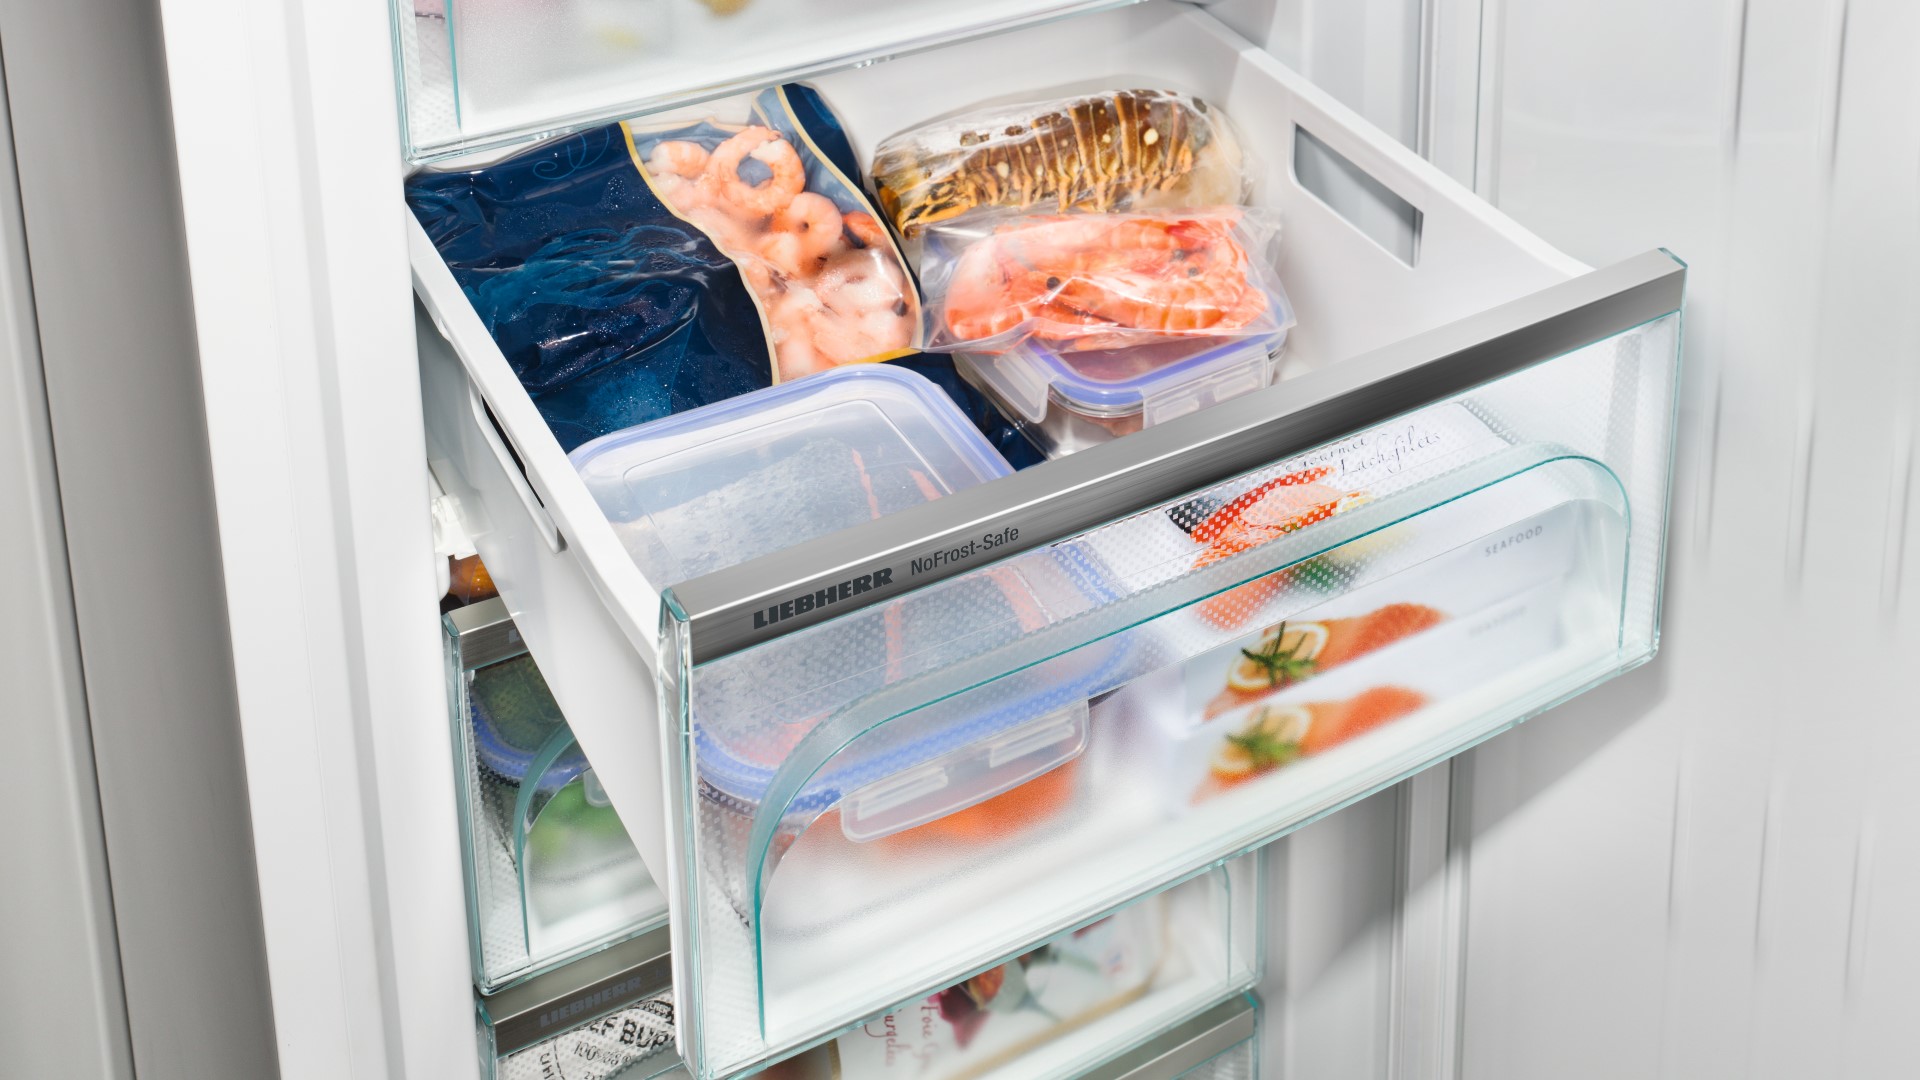 How long is too long to keep food stored in the freezer? | Liebherr